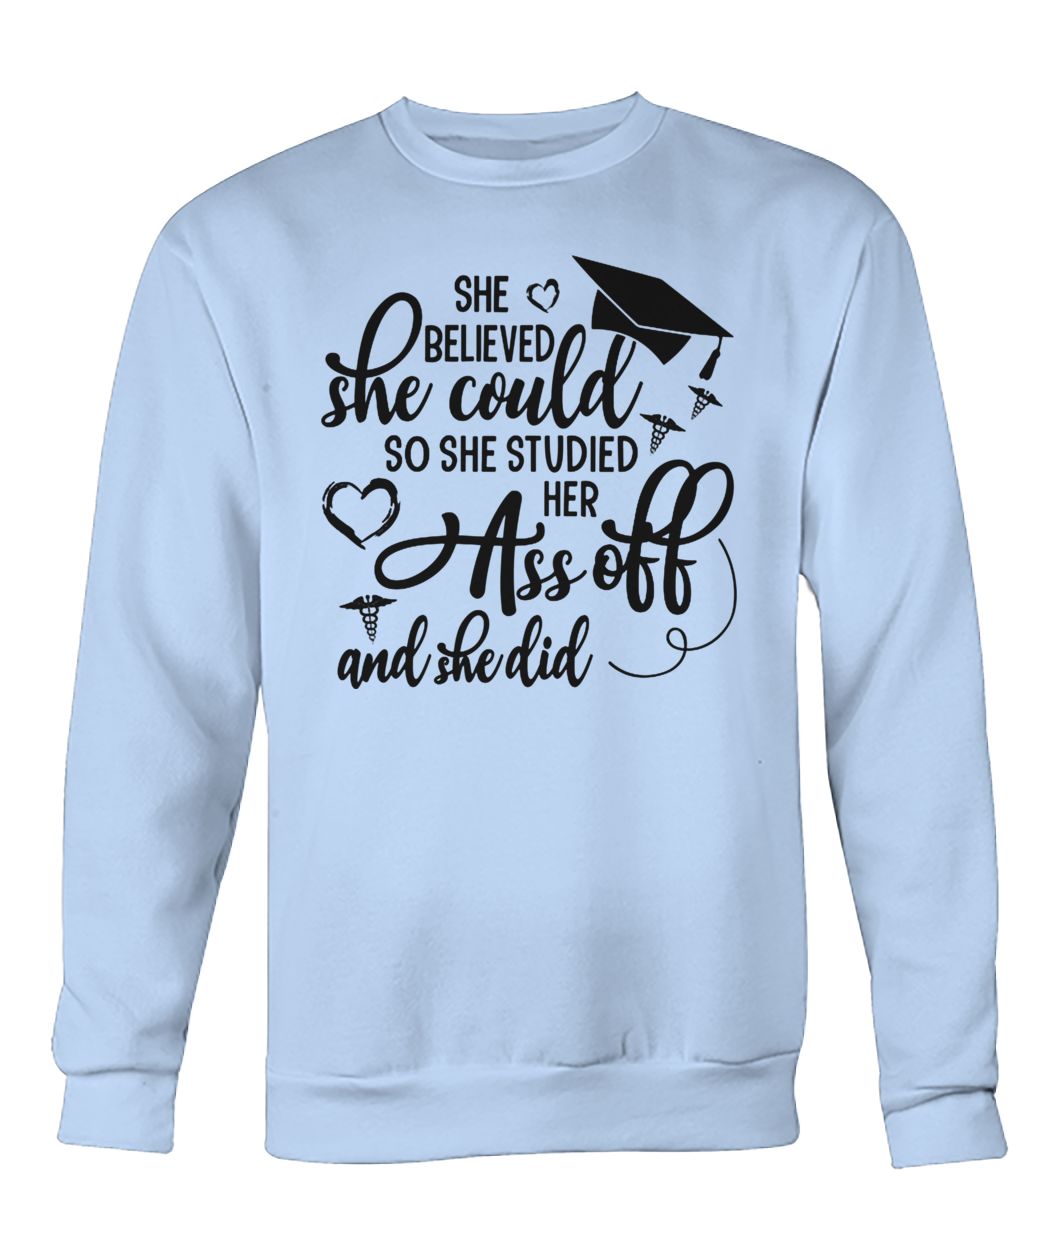 She believed she could so she studied her ass off and she did crew neck sweatshirt